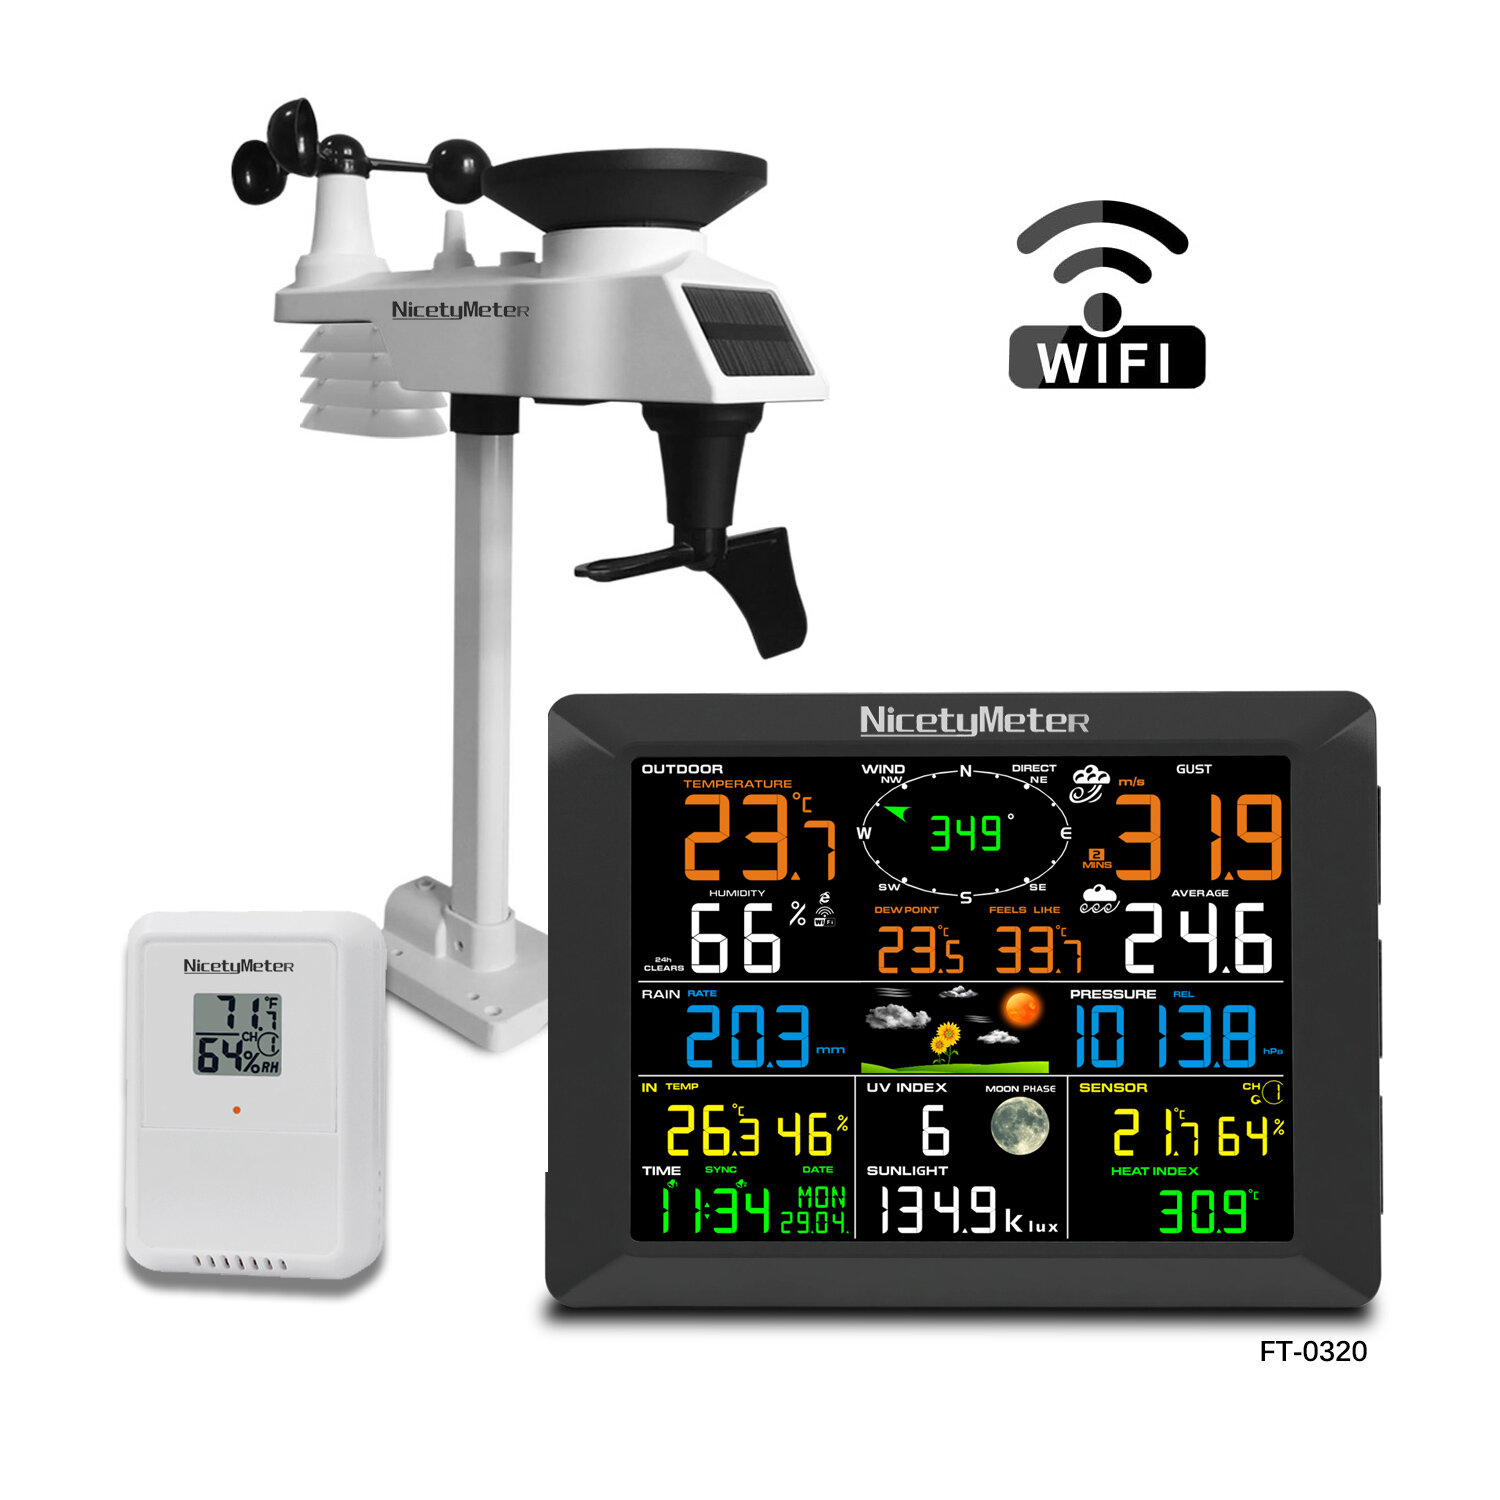 best price,nicetymeter,in,wifi,wireless,weather,station,discount